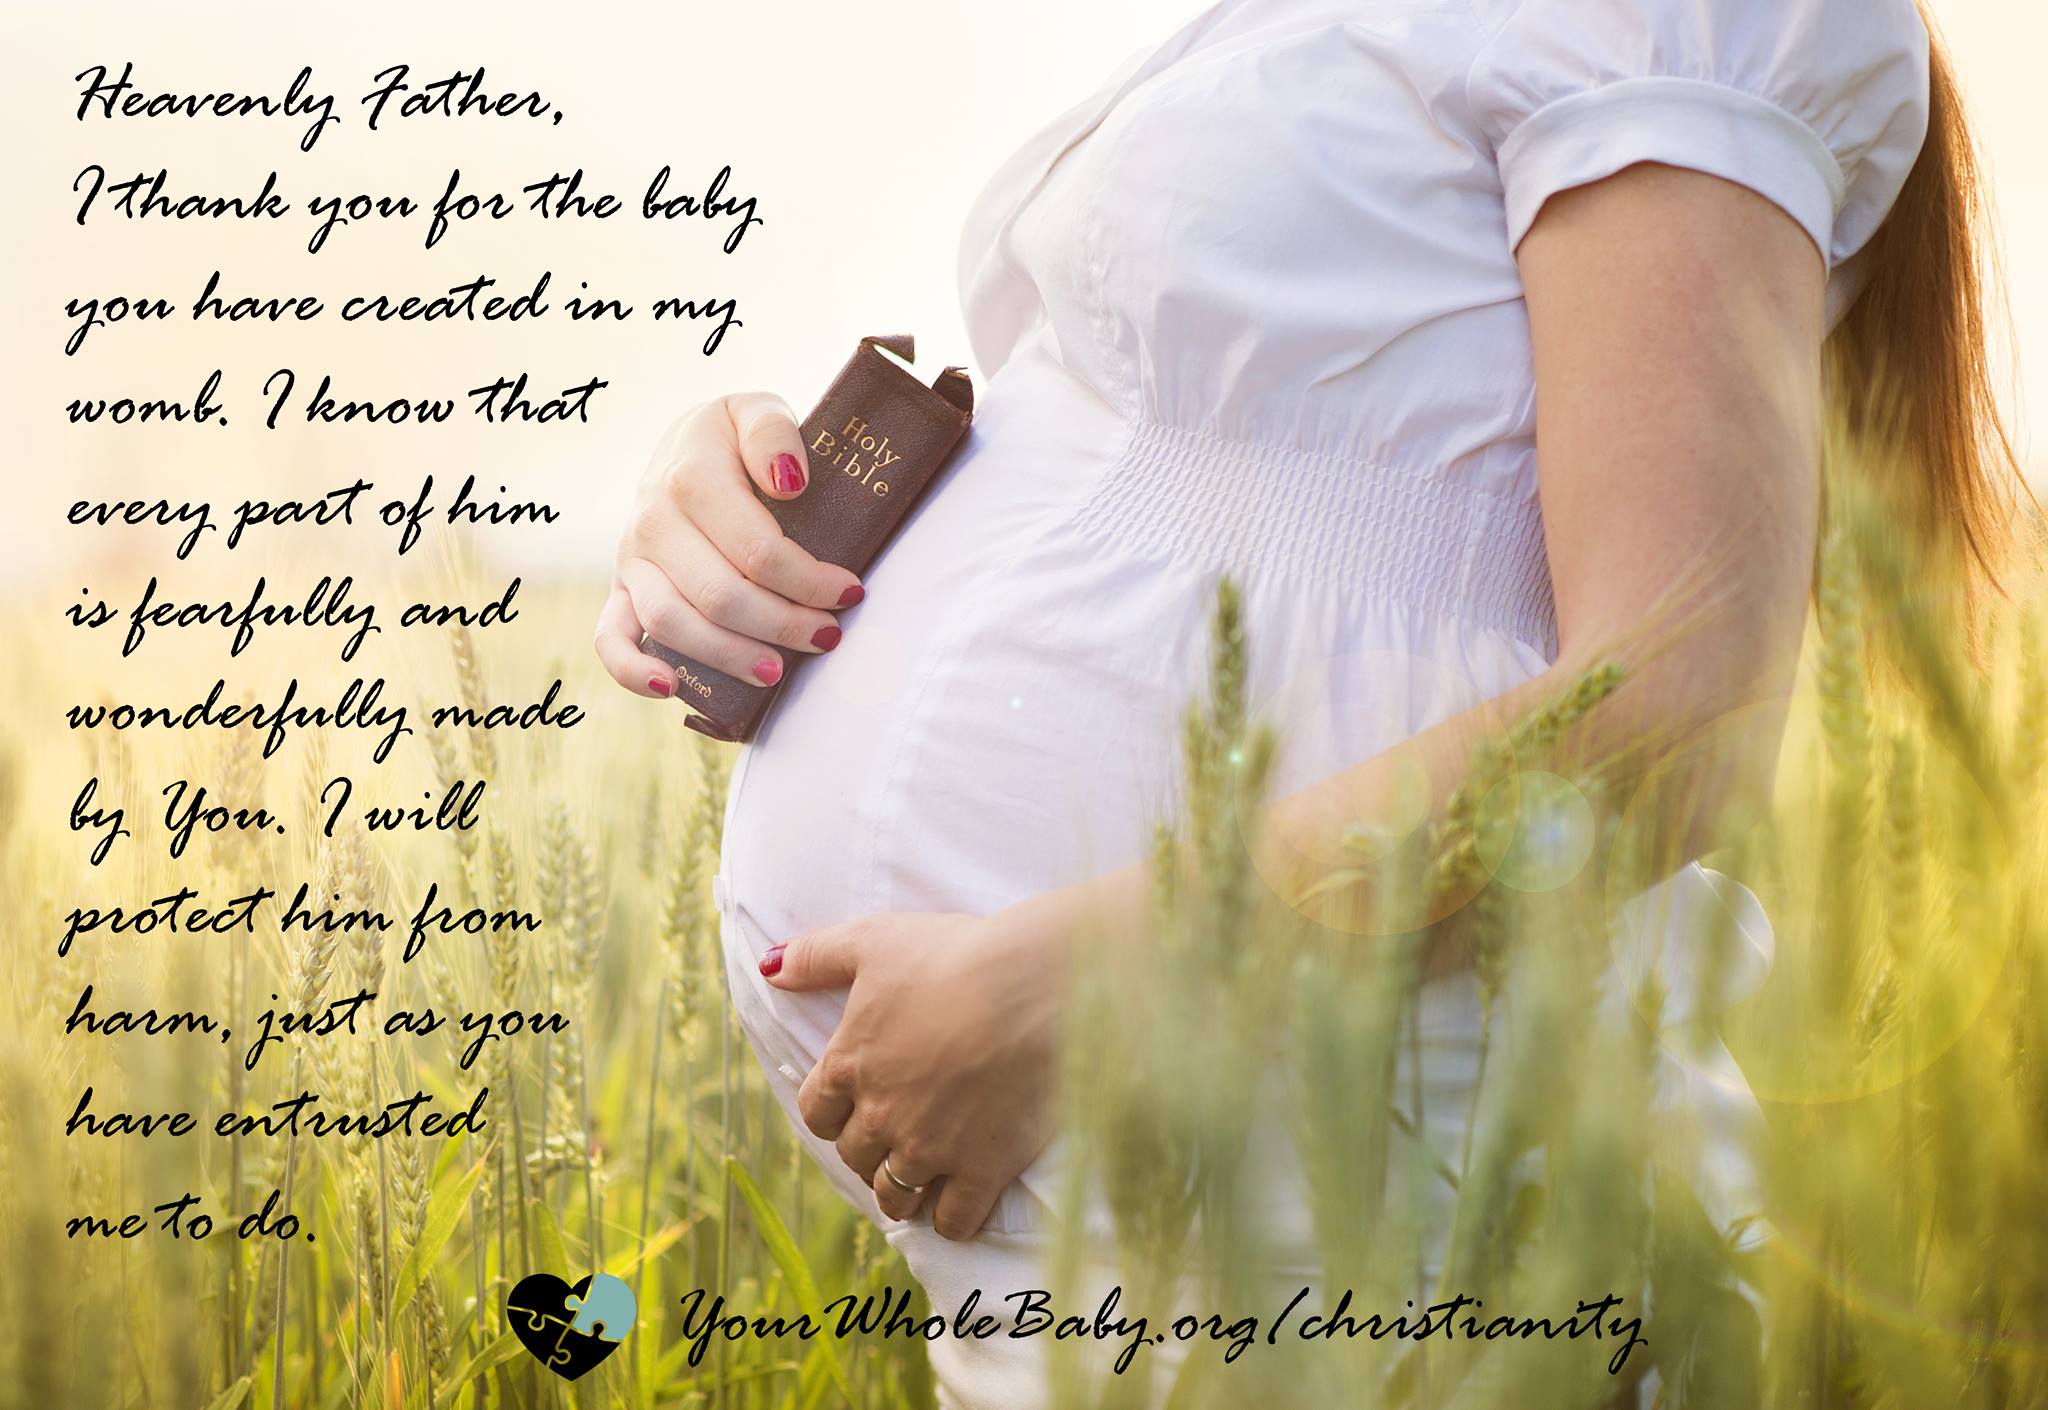  Image: Belly shot of a pregnant woman holding the bible to her stomach in a field. Text: “Heavenly Father, I thank you for the baby you have created in my womb. I know that every part of him is fearfully and wonderfully made by You. I will protect h